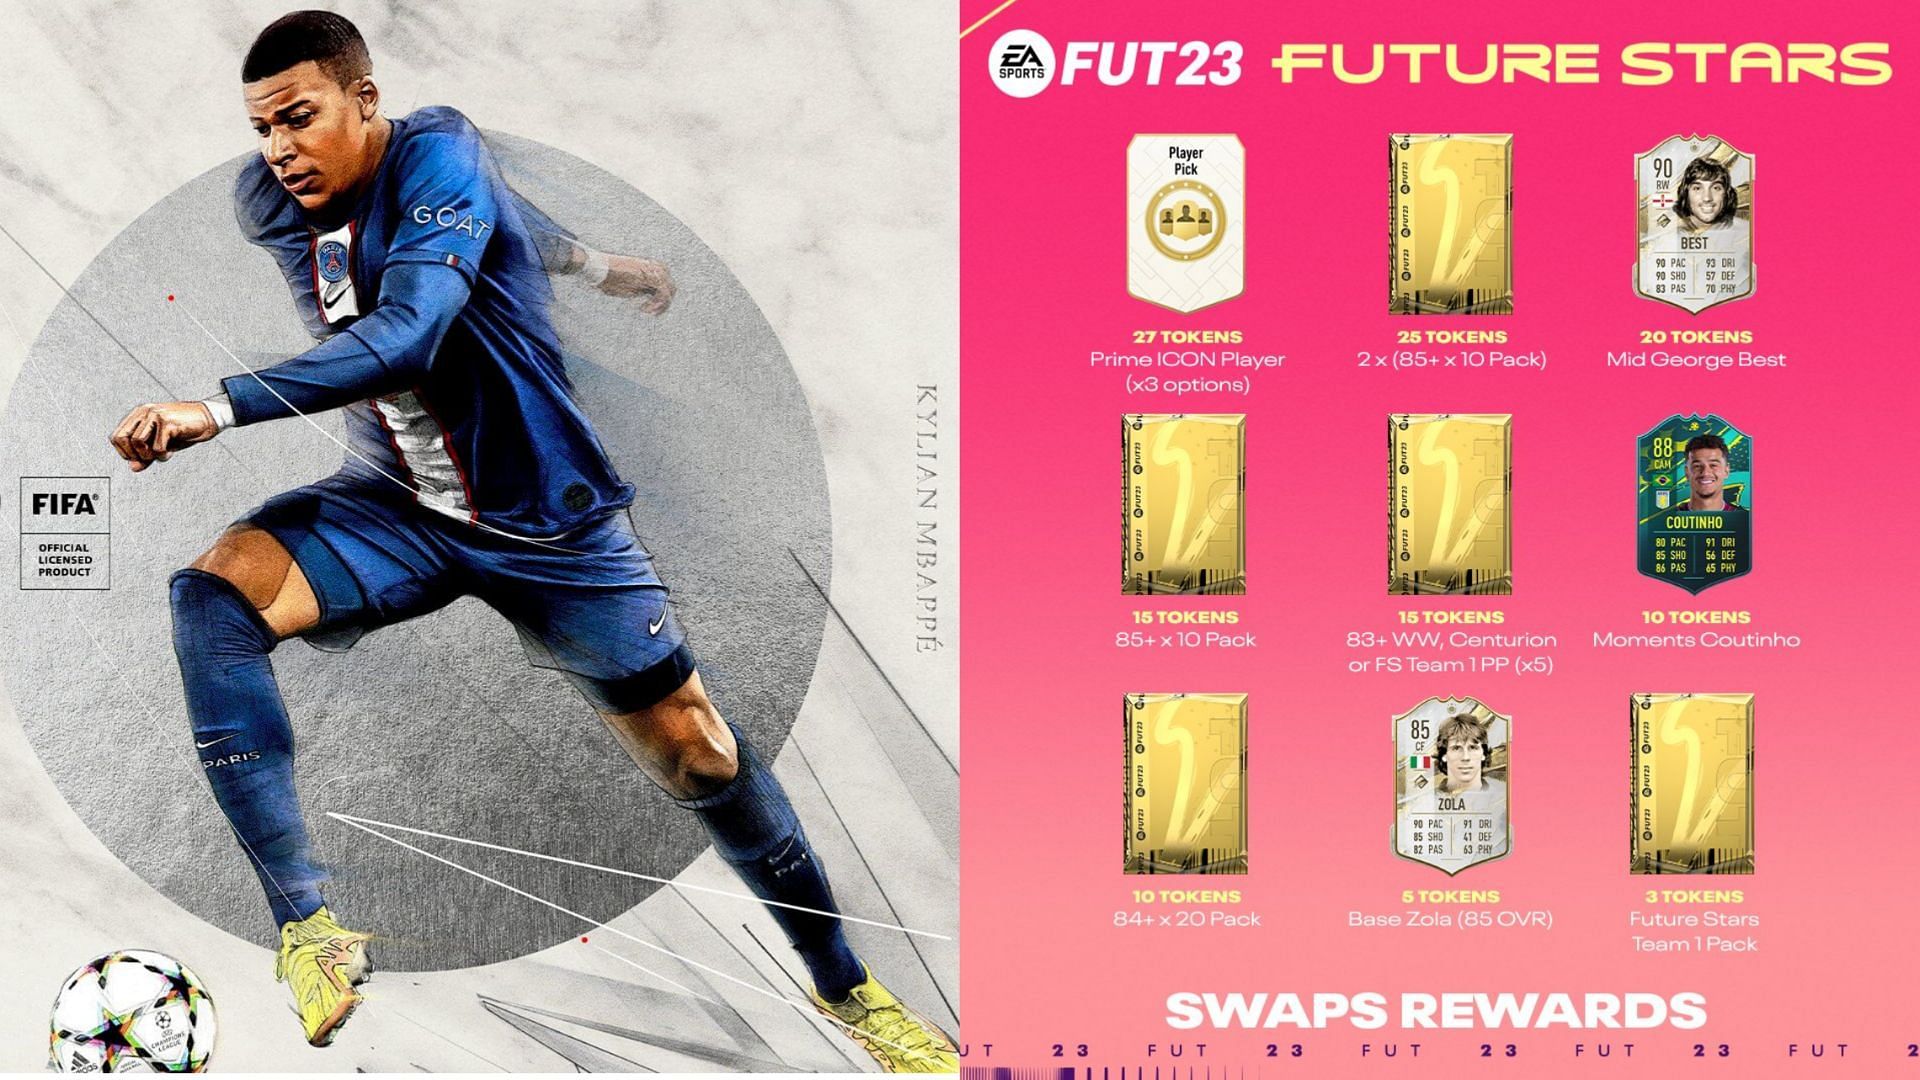 The swaps program has several useful rewards in exchange for tokens (Images via EA Sports)